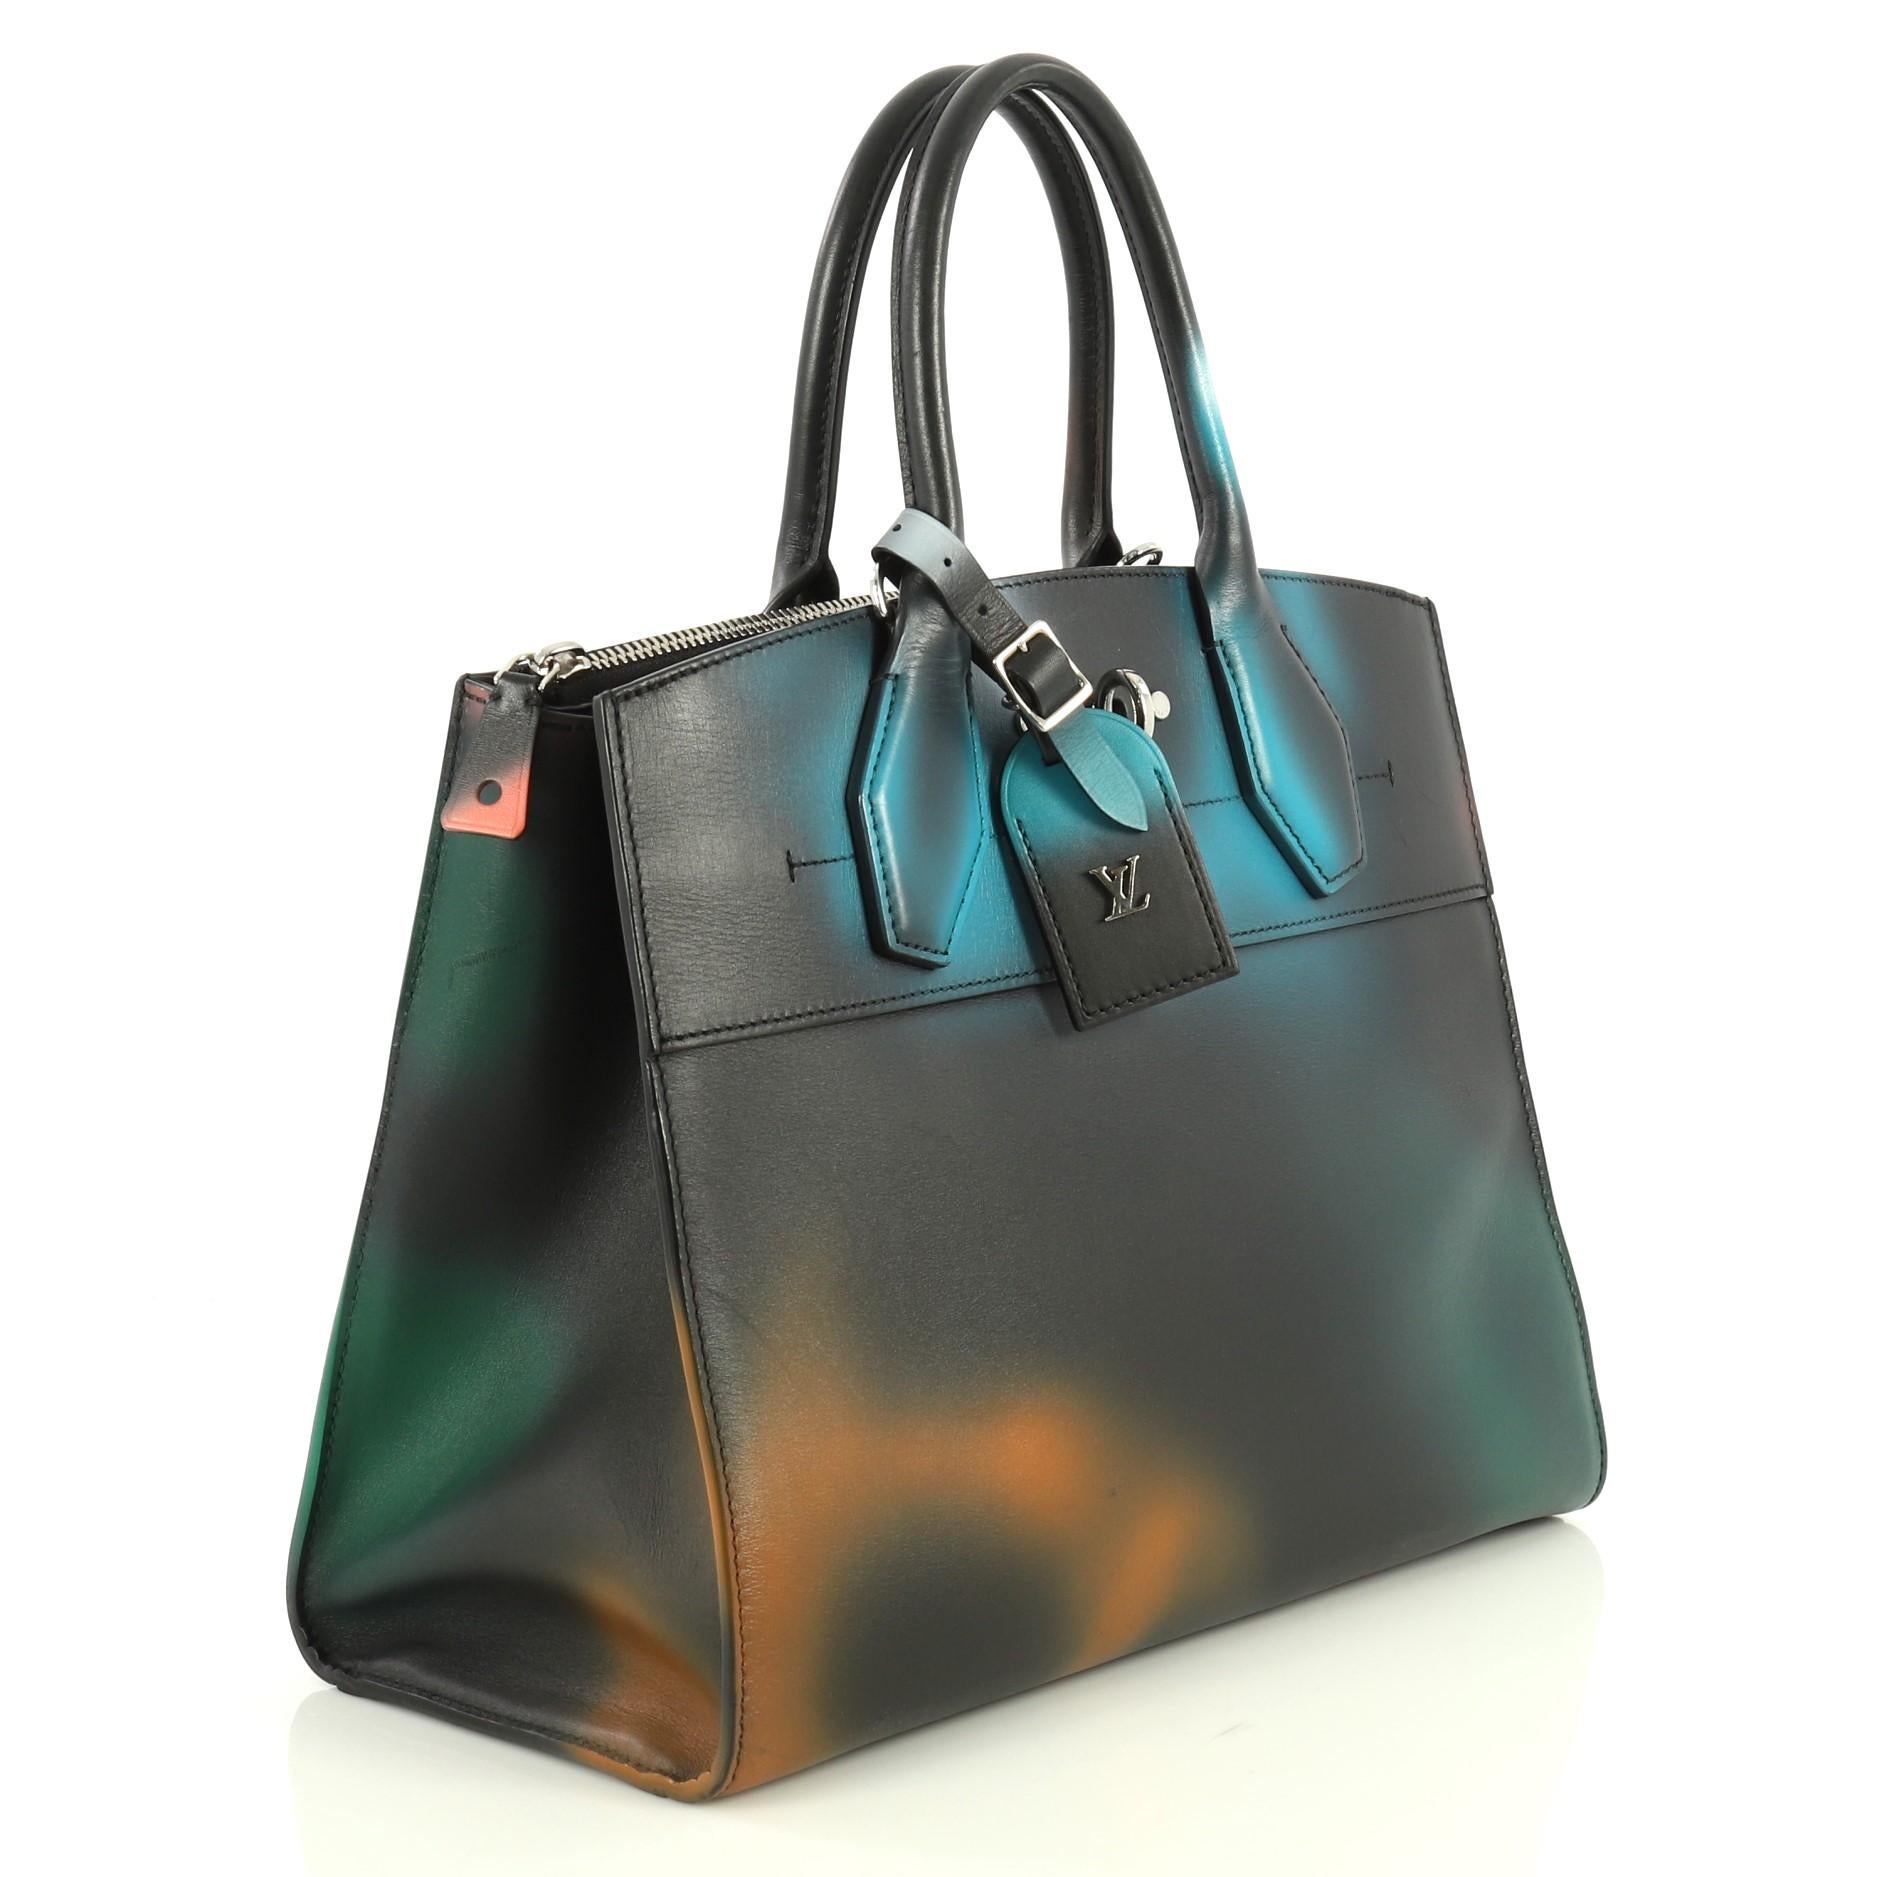 This Louis Vuitton City Steamer Handbag Hologram Print Leather MM, crafted in black leather with multicolor hologram print, features dual rolled leather handles, front central lock with LV stamped logo, protective base studs and silver-tone